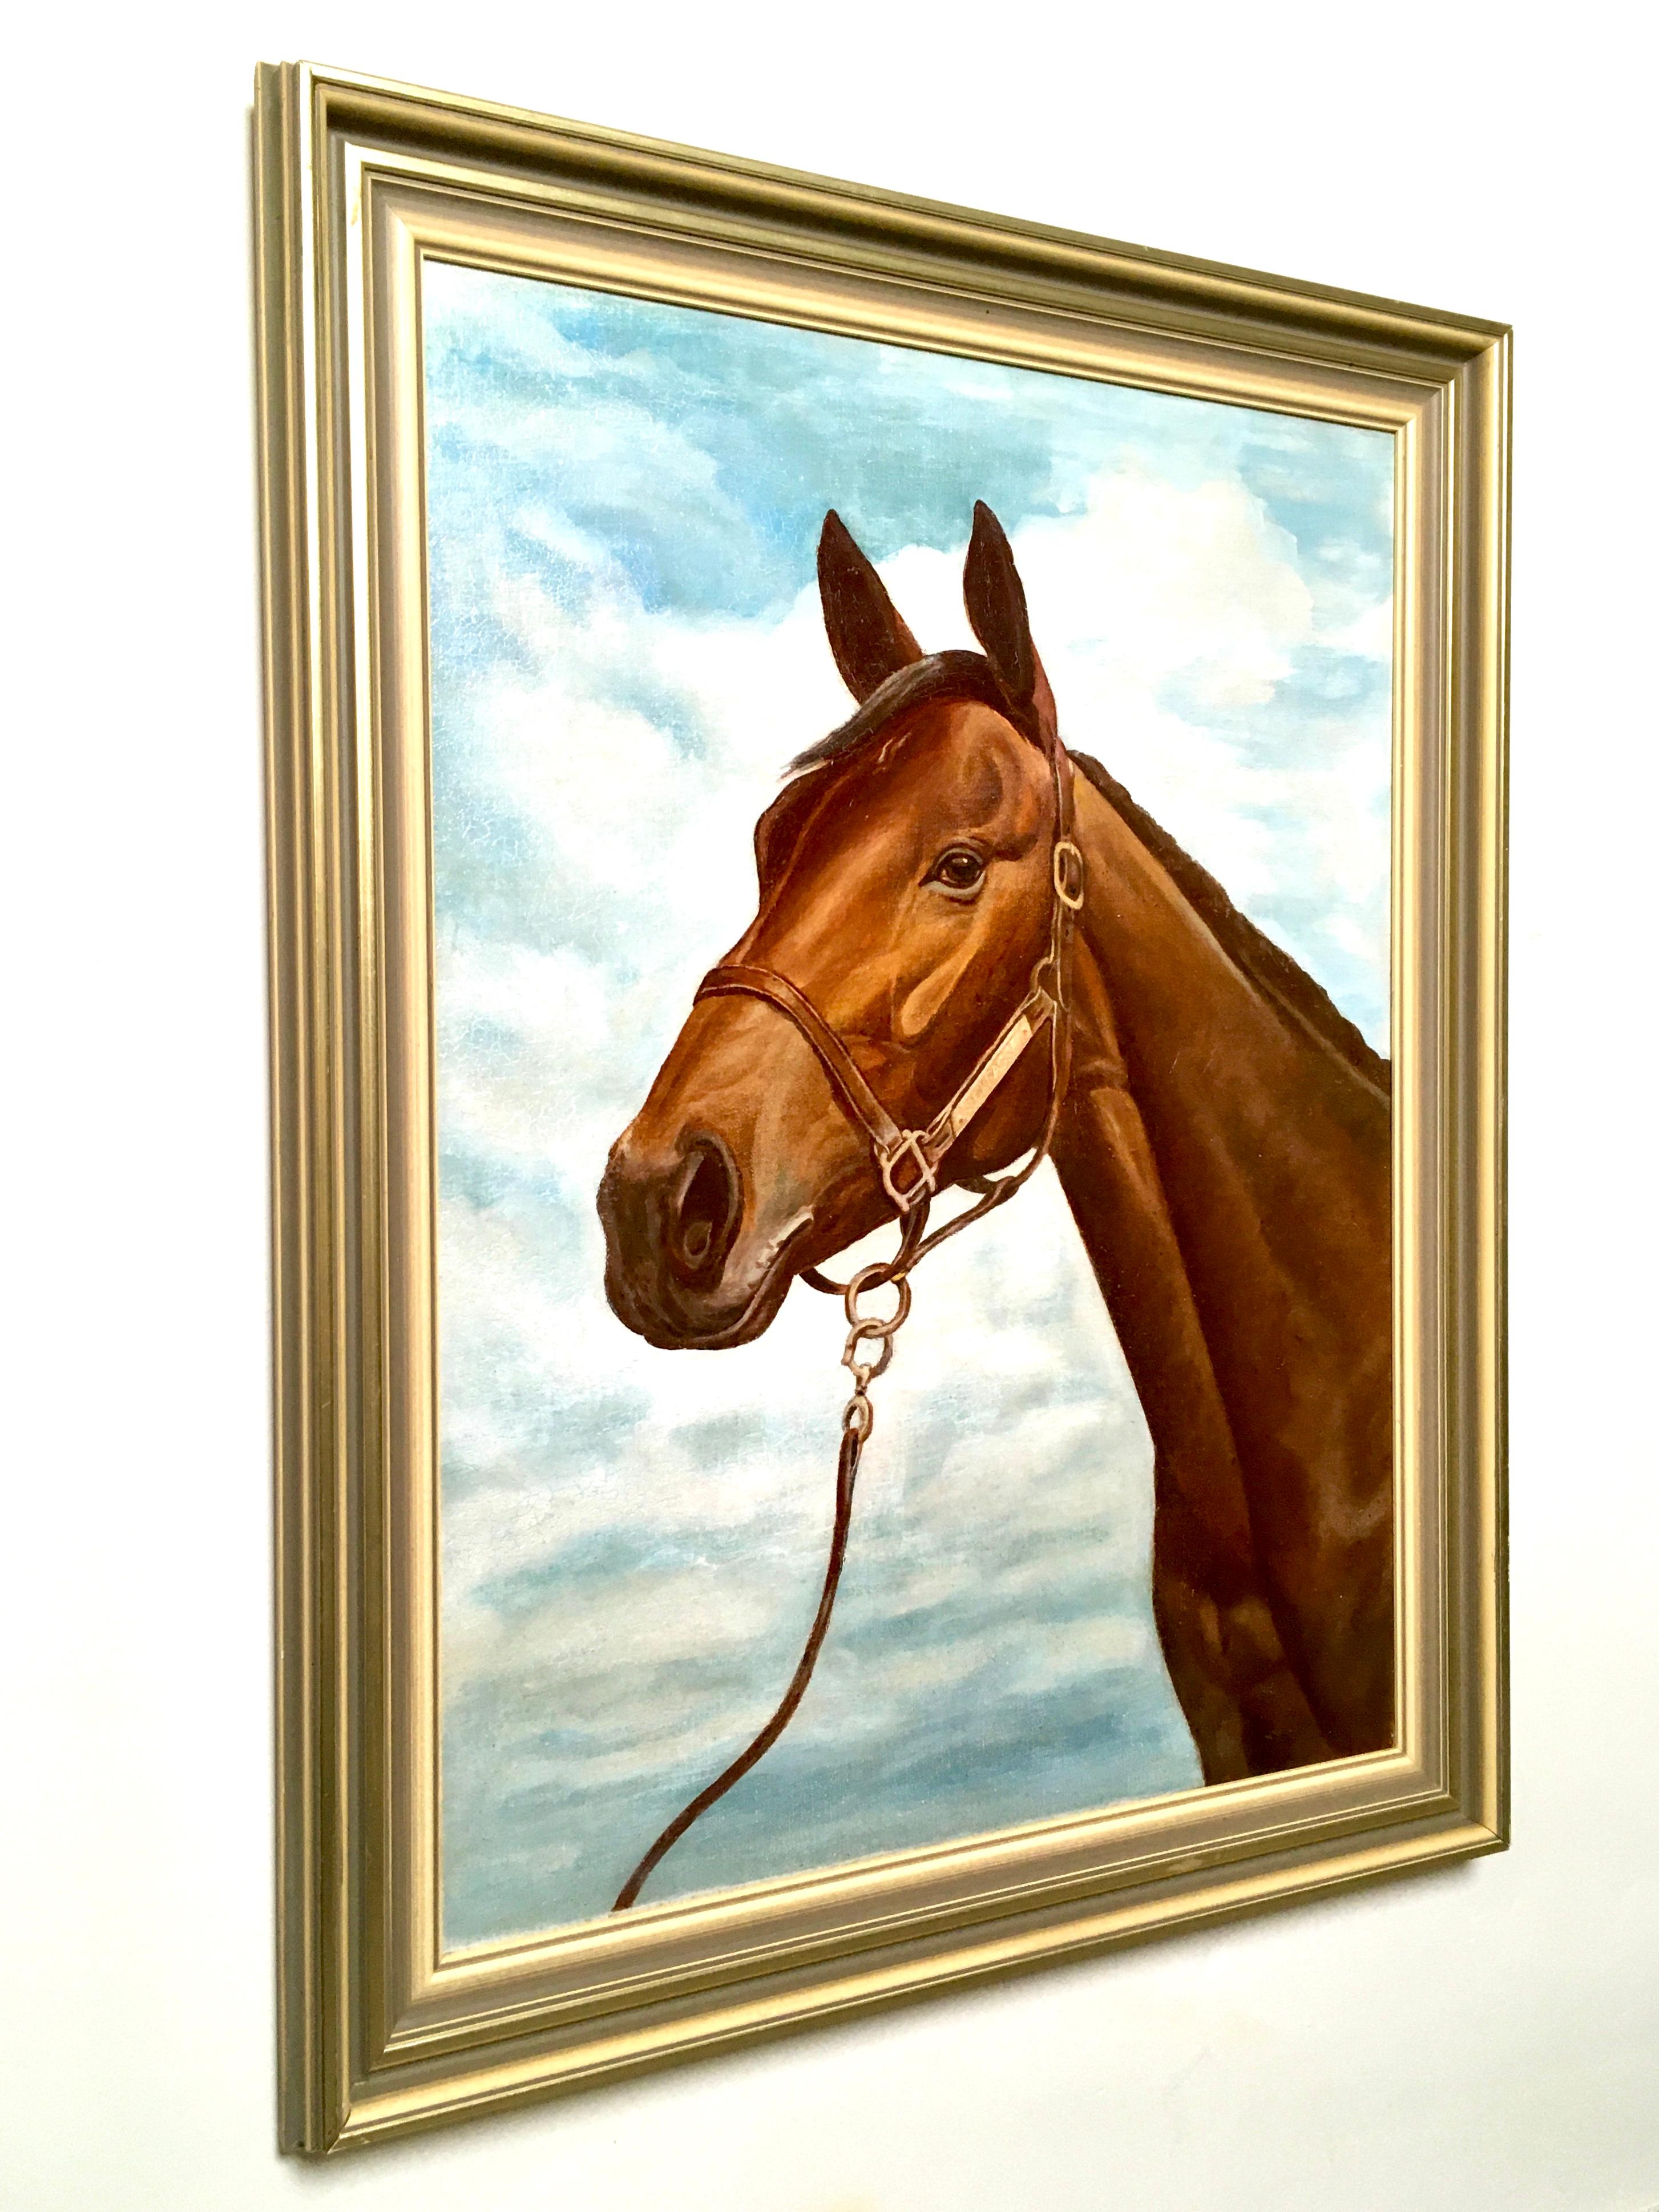 An excellent amateur oil painting of Buckpasser, the 1966 Horse of the Year. The artist is Anna Whitehead, an Australian amateur equine painter. 

We love this painting for it’s simplicity. It’s a typical example of equine portraits of the 1960s